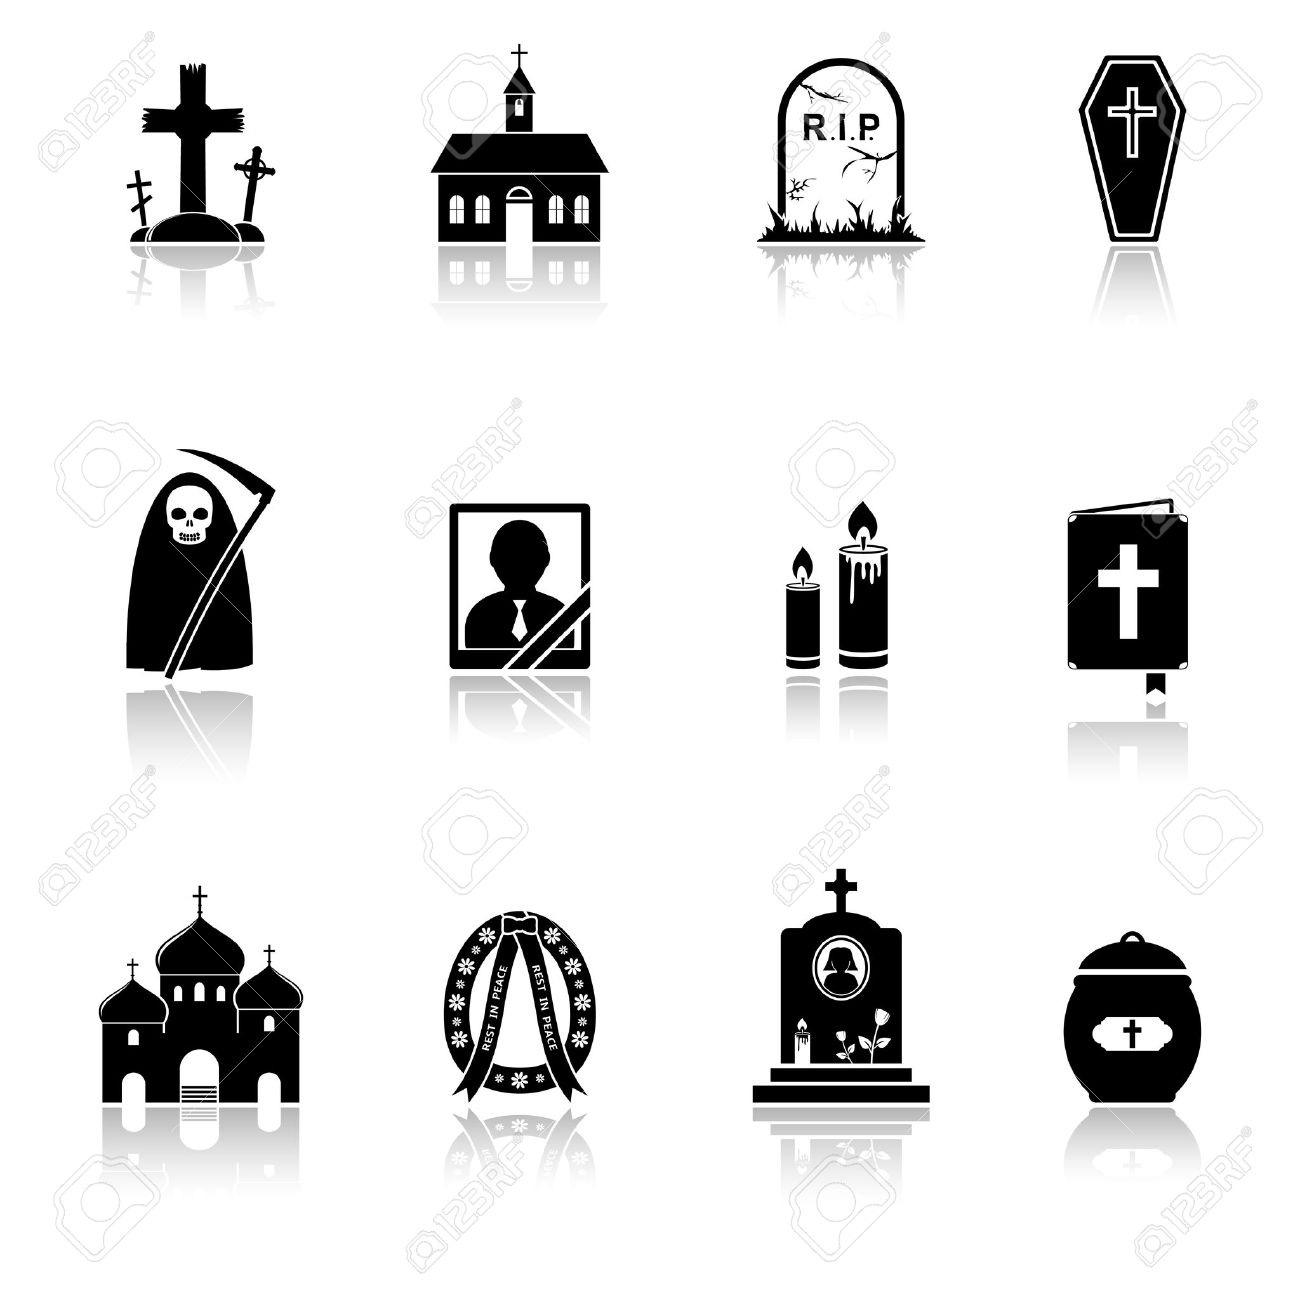 616 Funeral Flowers Stock Illustrations, Cliparts And Royalty Free.